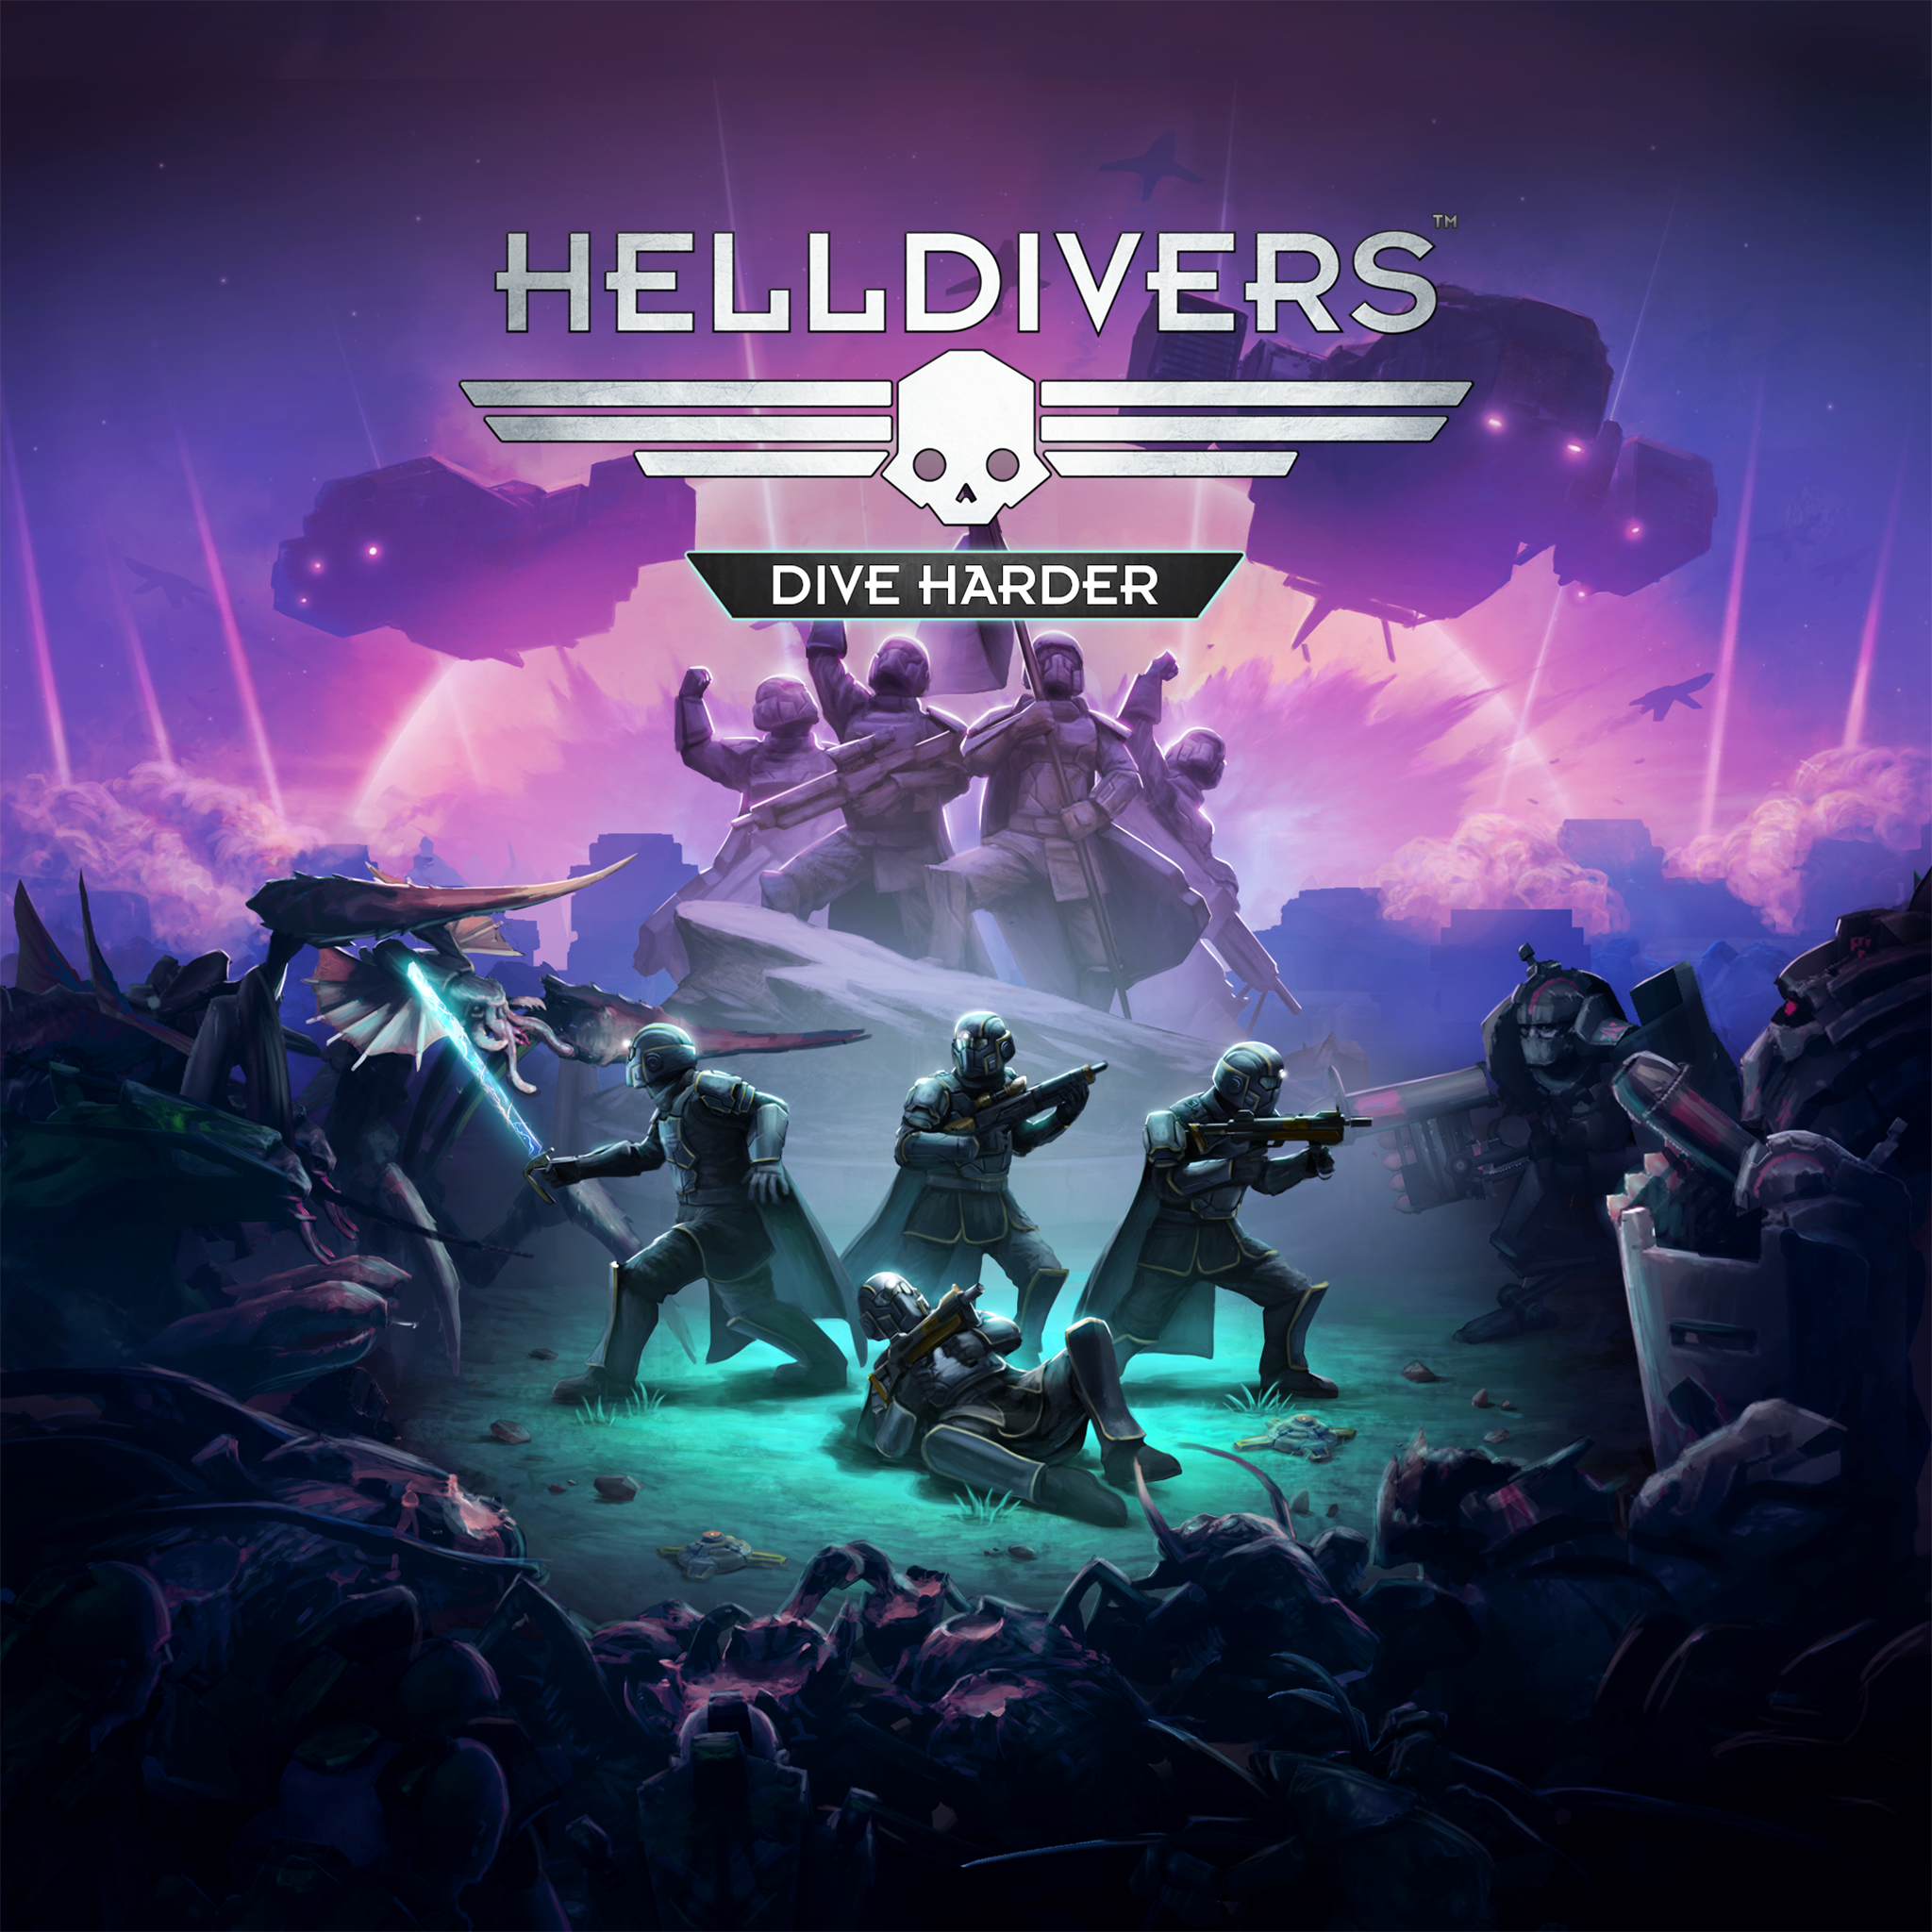 helldivers how to make 2 player ps4 local coop